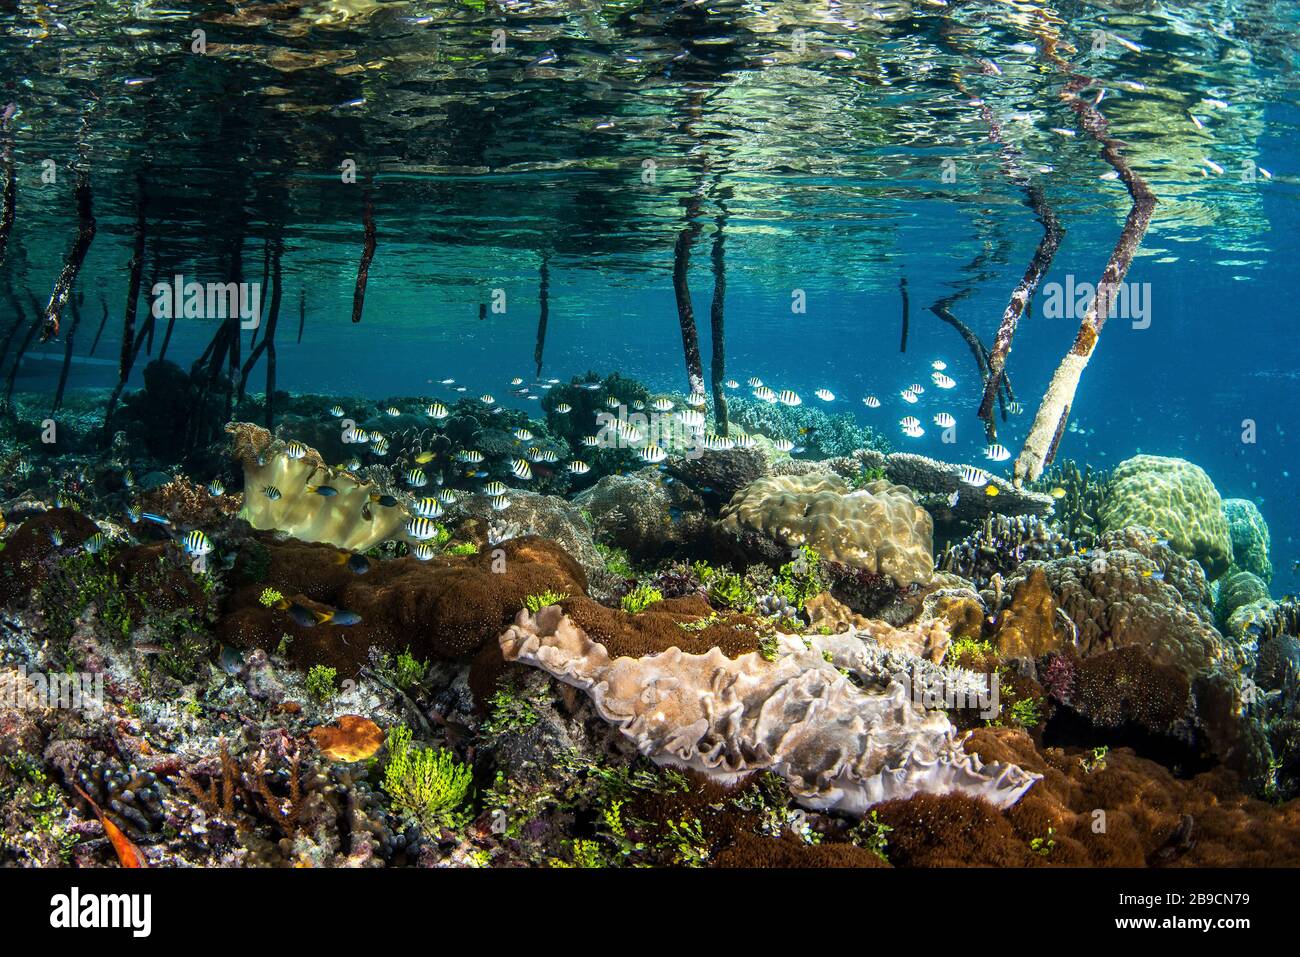 Small fish use the mangrove roots as a nursery, Raja Ampat, Indonesia. Stock Photo